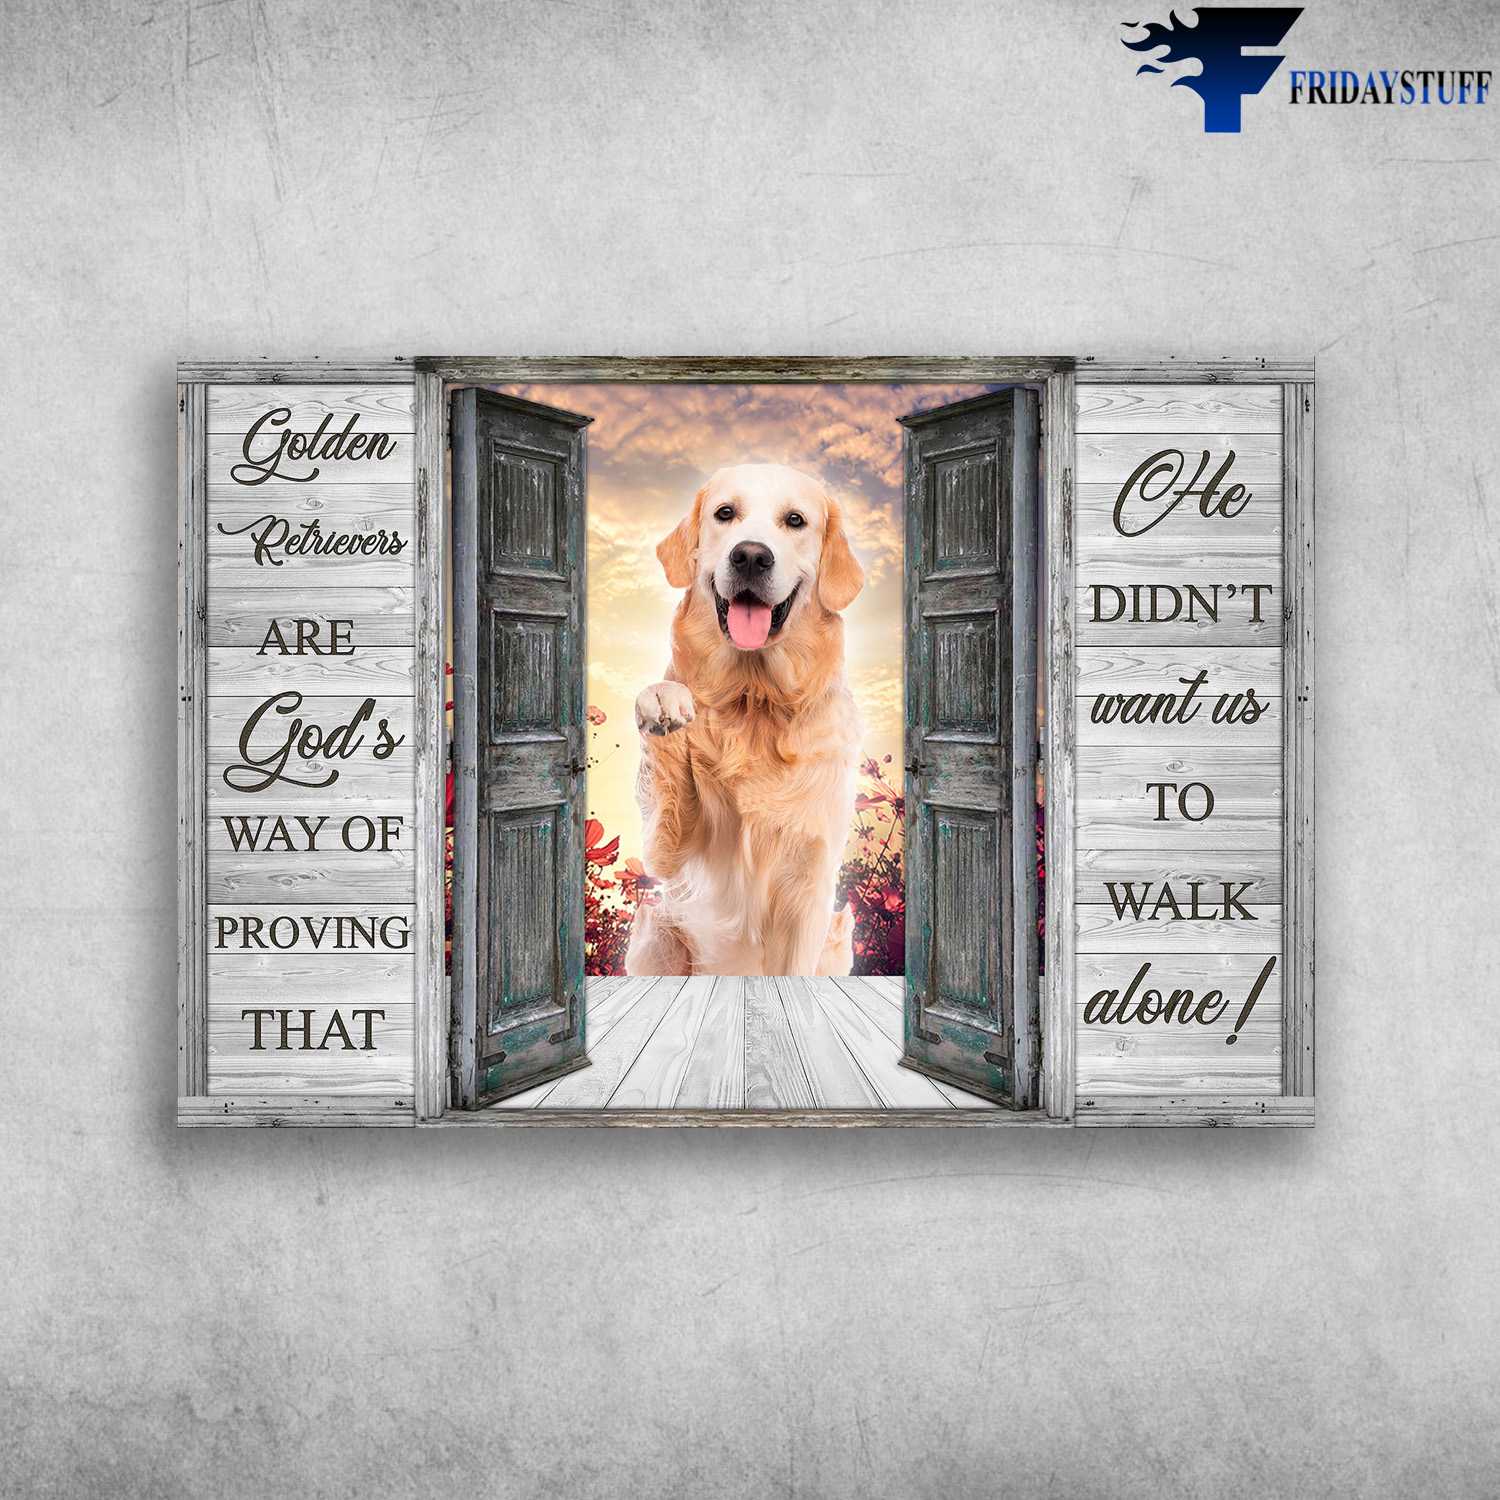 Golden Retrivers Window - Golden Retrivers Are God's Way Of Proving, That He Didn't Want Us To Walk Alone